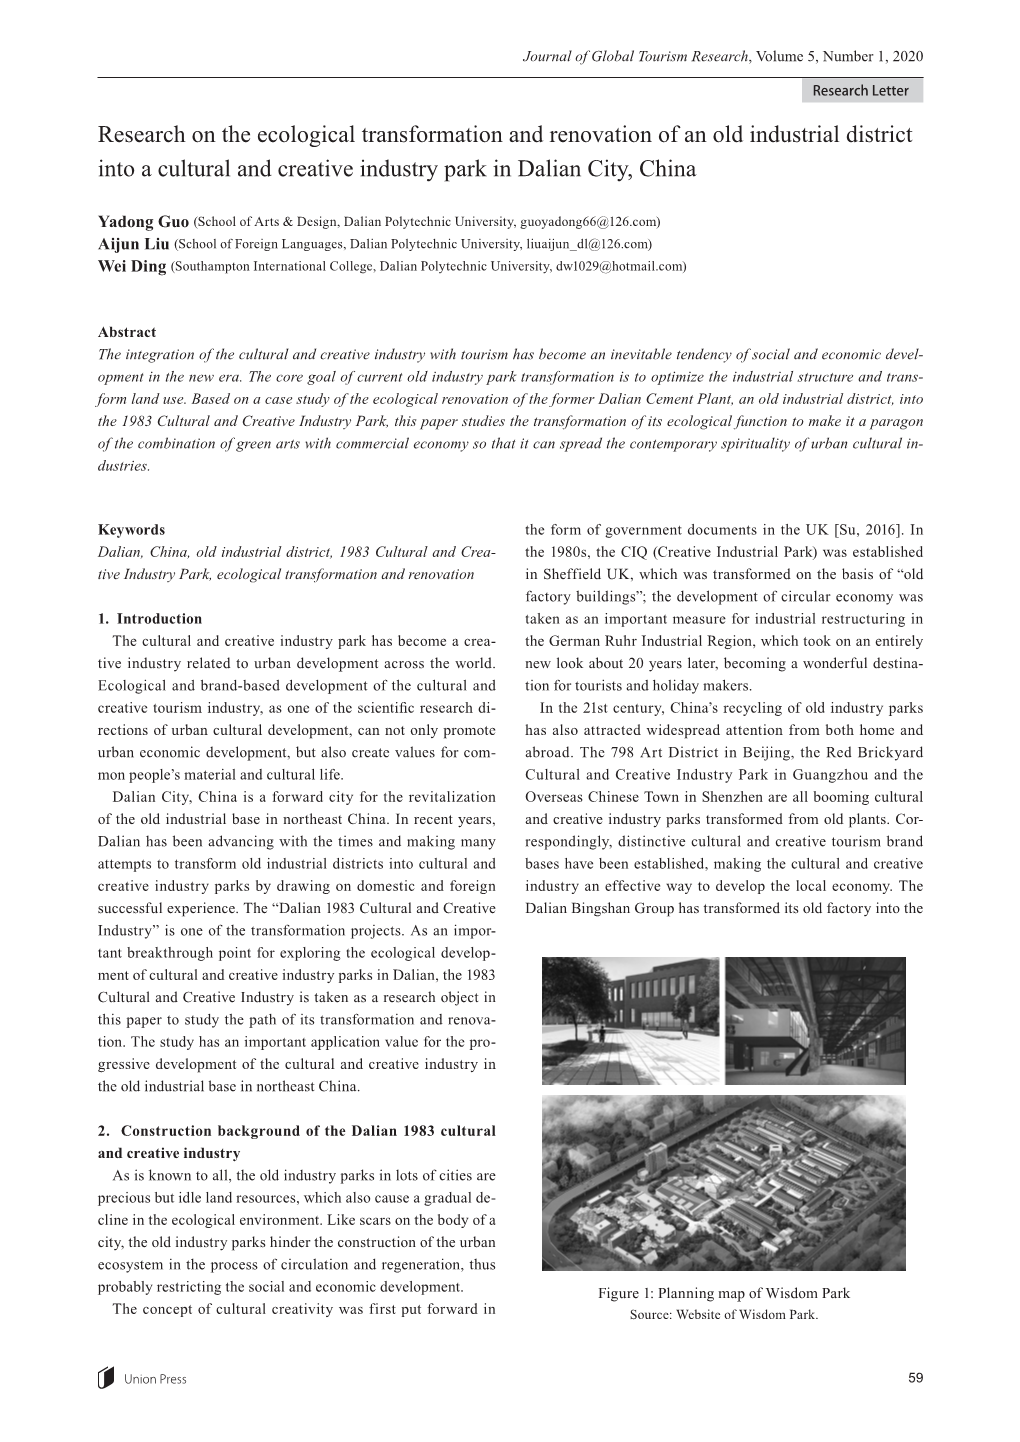 Research on the Ecological Transformation and Renovation of an Old Industrial District Into a Cultural and Creative Industry Park in Dalian City, China